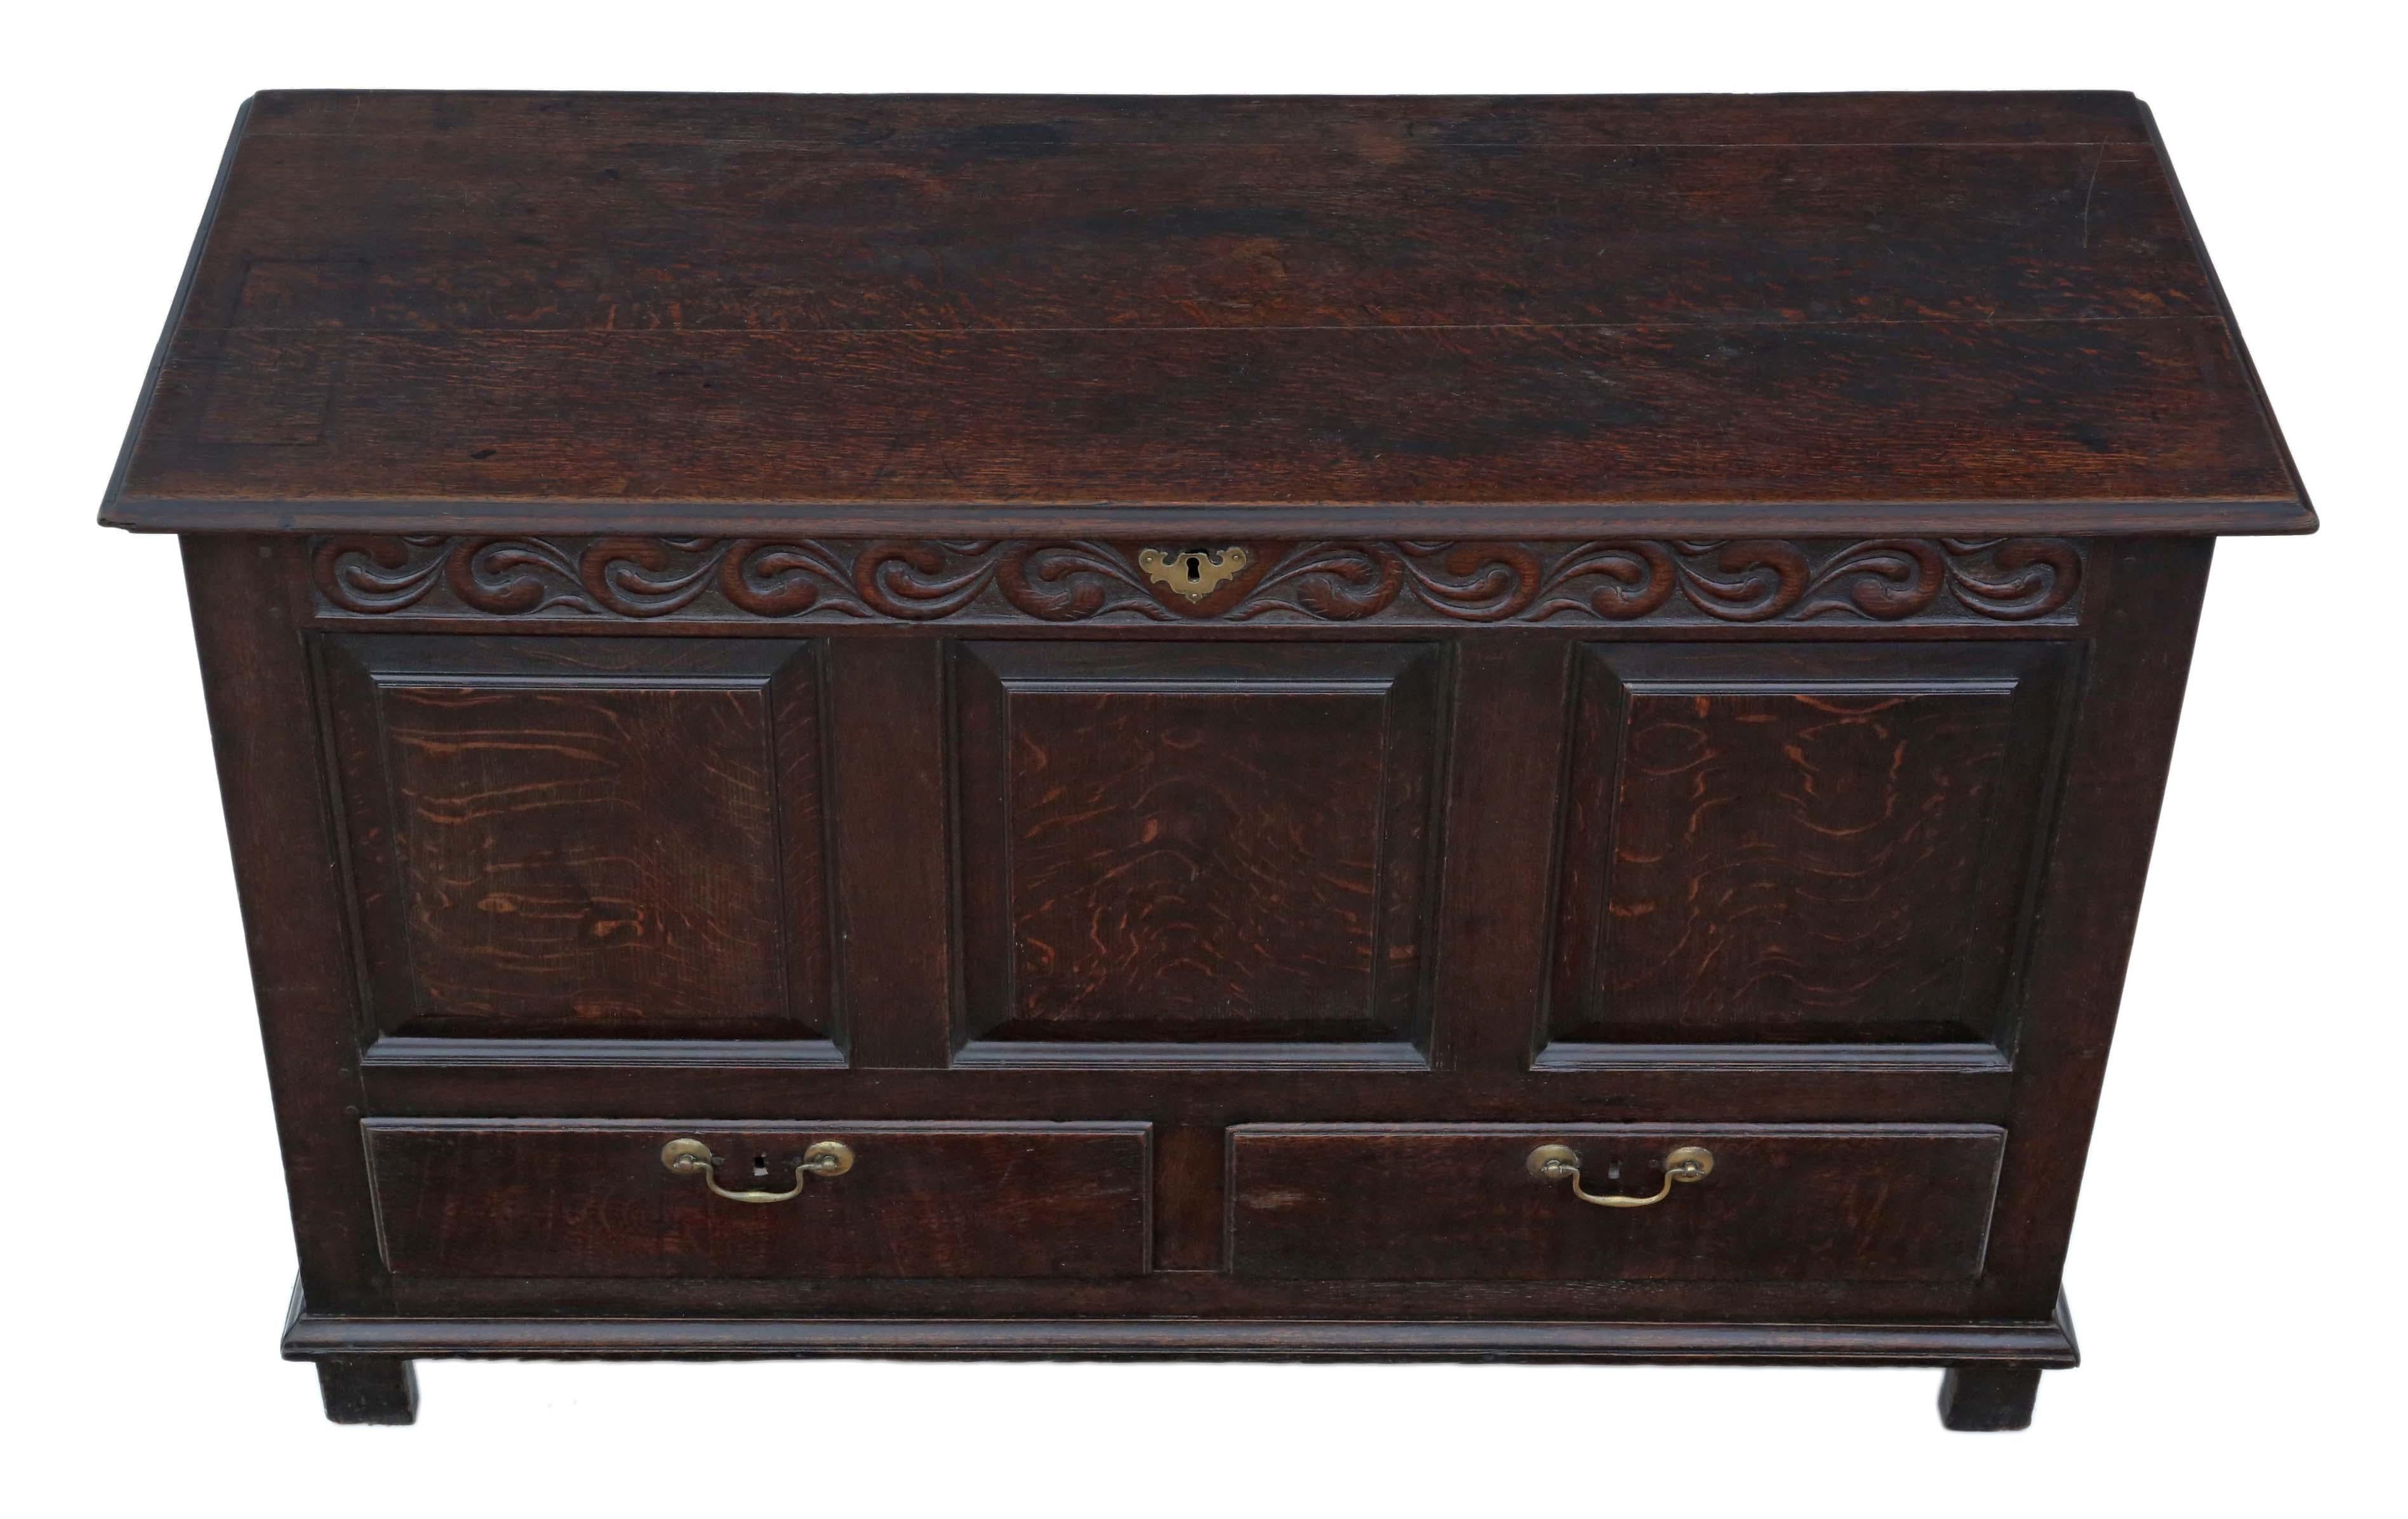 Antique fine quality Georgian oak mule chest coffer 18th Century

Solid and strong, with no loose joints. Full of age, character and charm. The oak lined drawers slide freely.

Would look great in the right location! Lovely clean lines... a rare